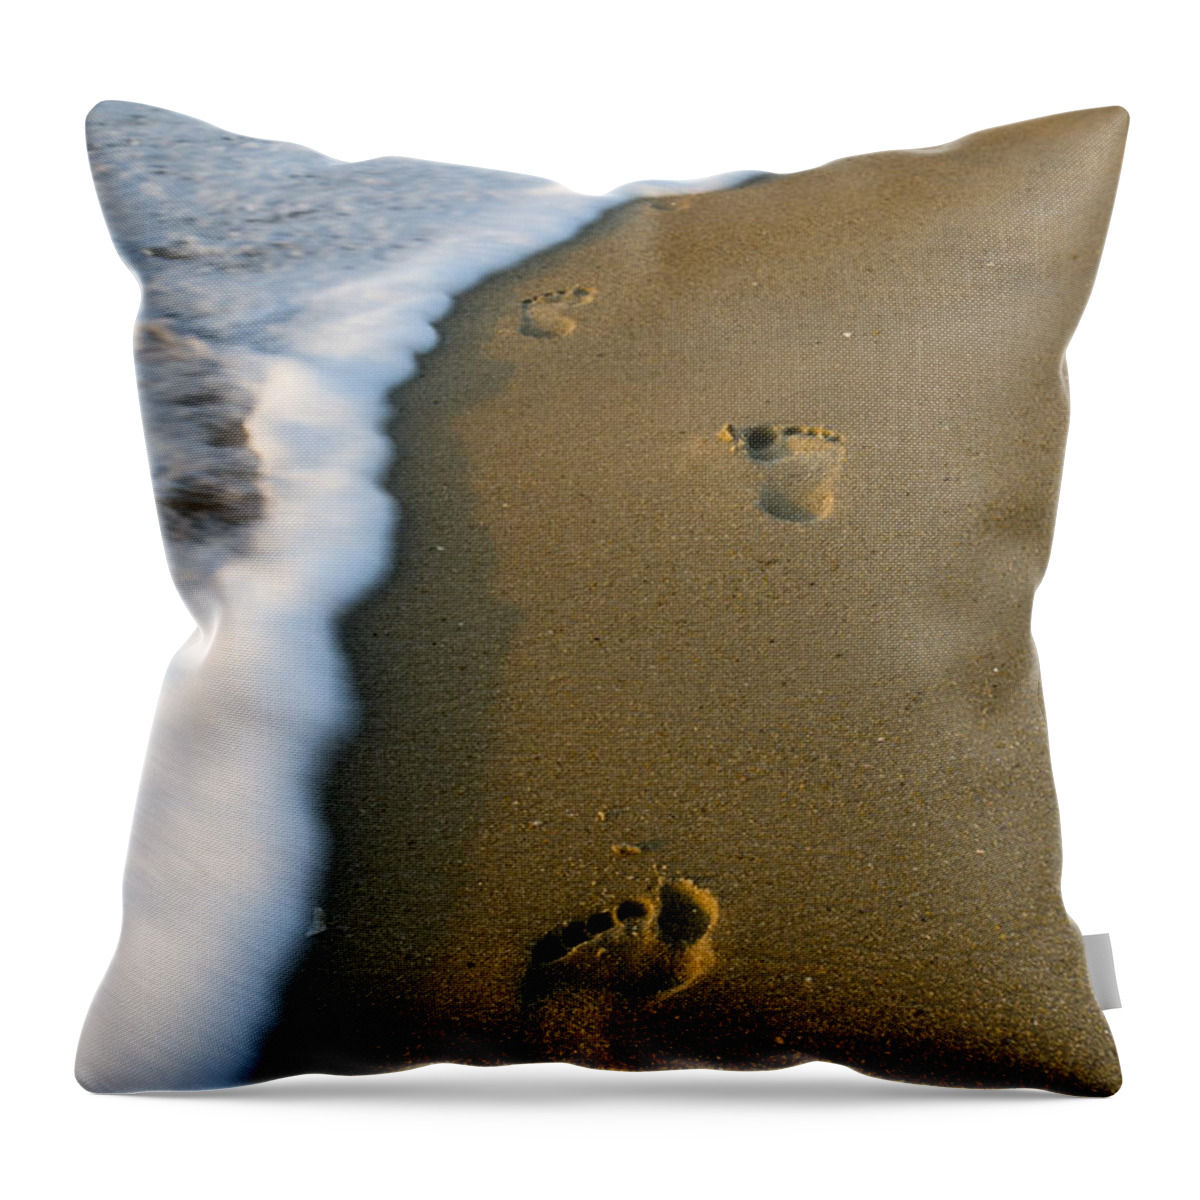  Atlantic Ocean Throw Pillow featuring the photograph Foot Prints in the Sand by Crystal Wightman